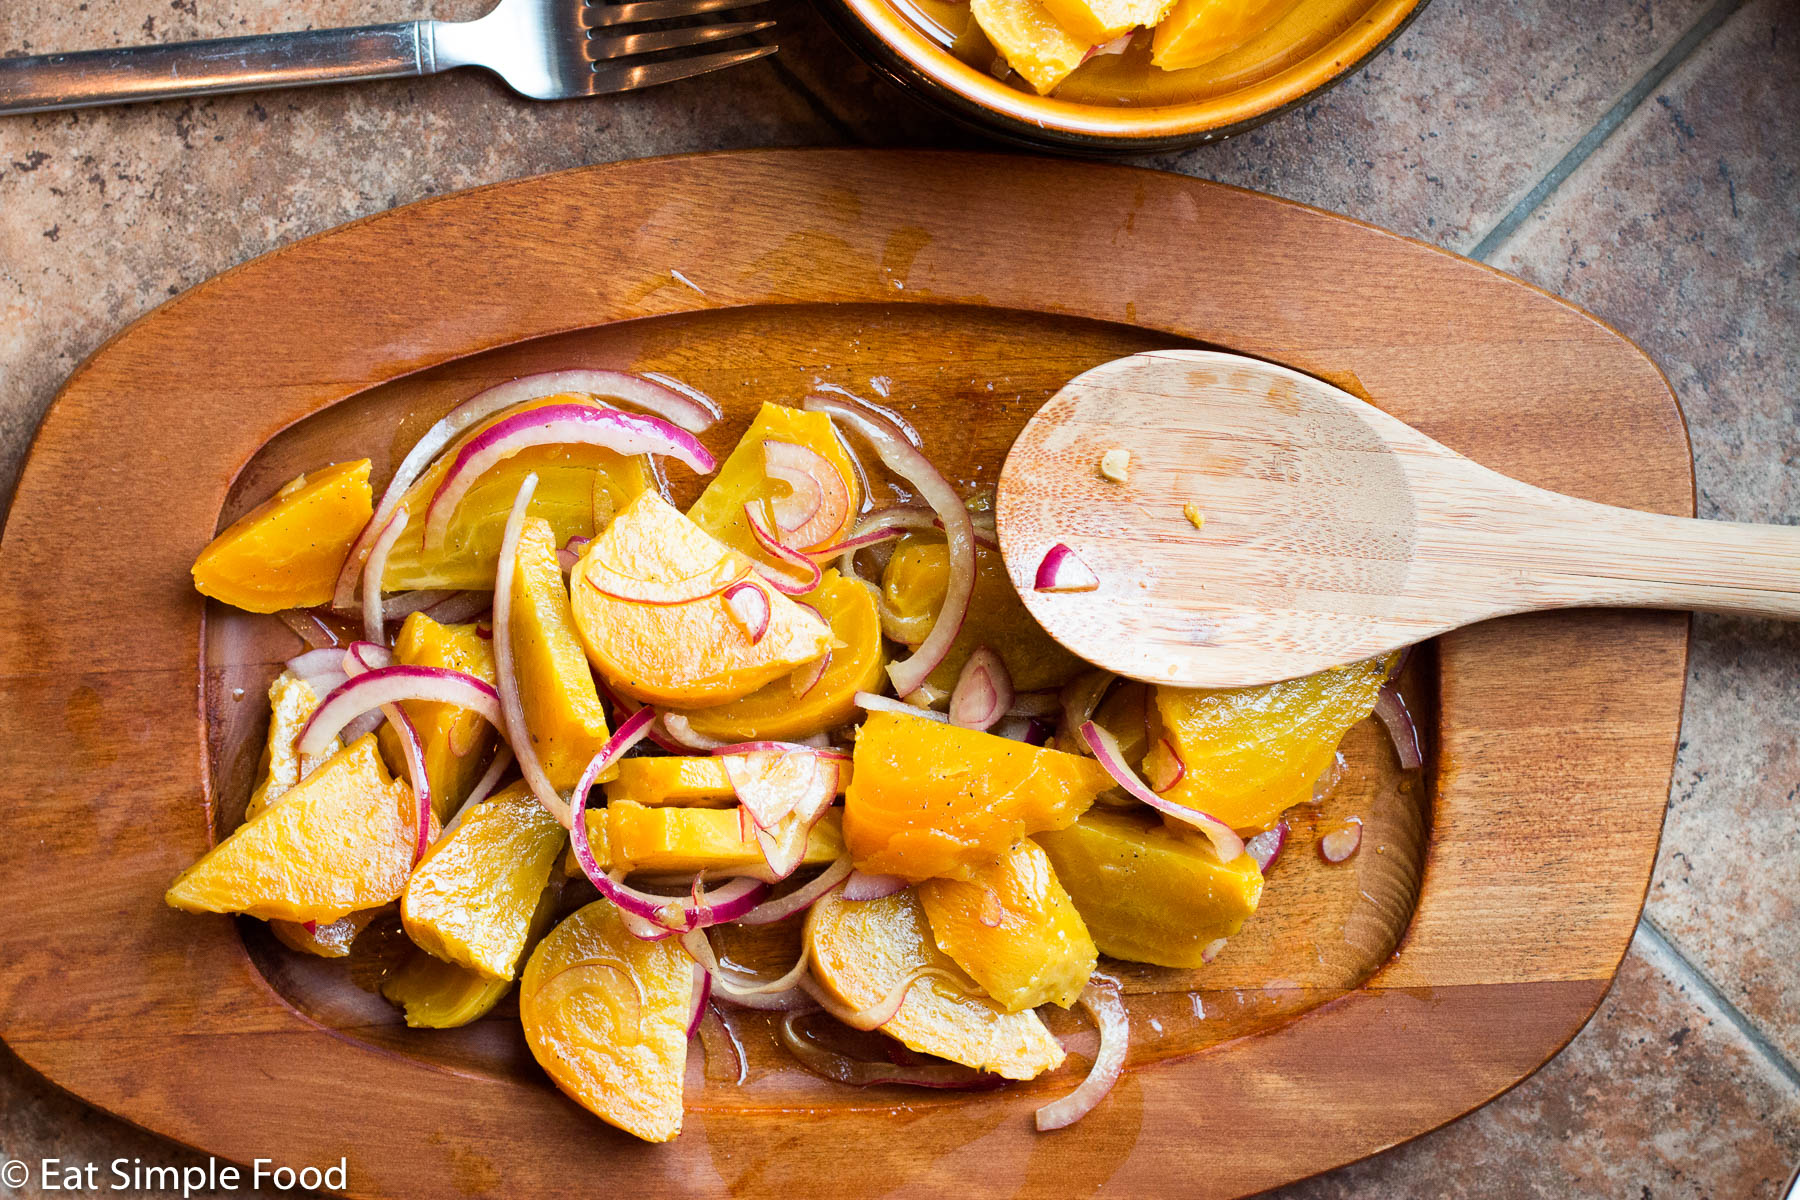 Yellow Golden Beets roasted and sliced and tossed with red onions and a dressing. On a wood plate with a wood spoon.